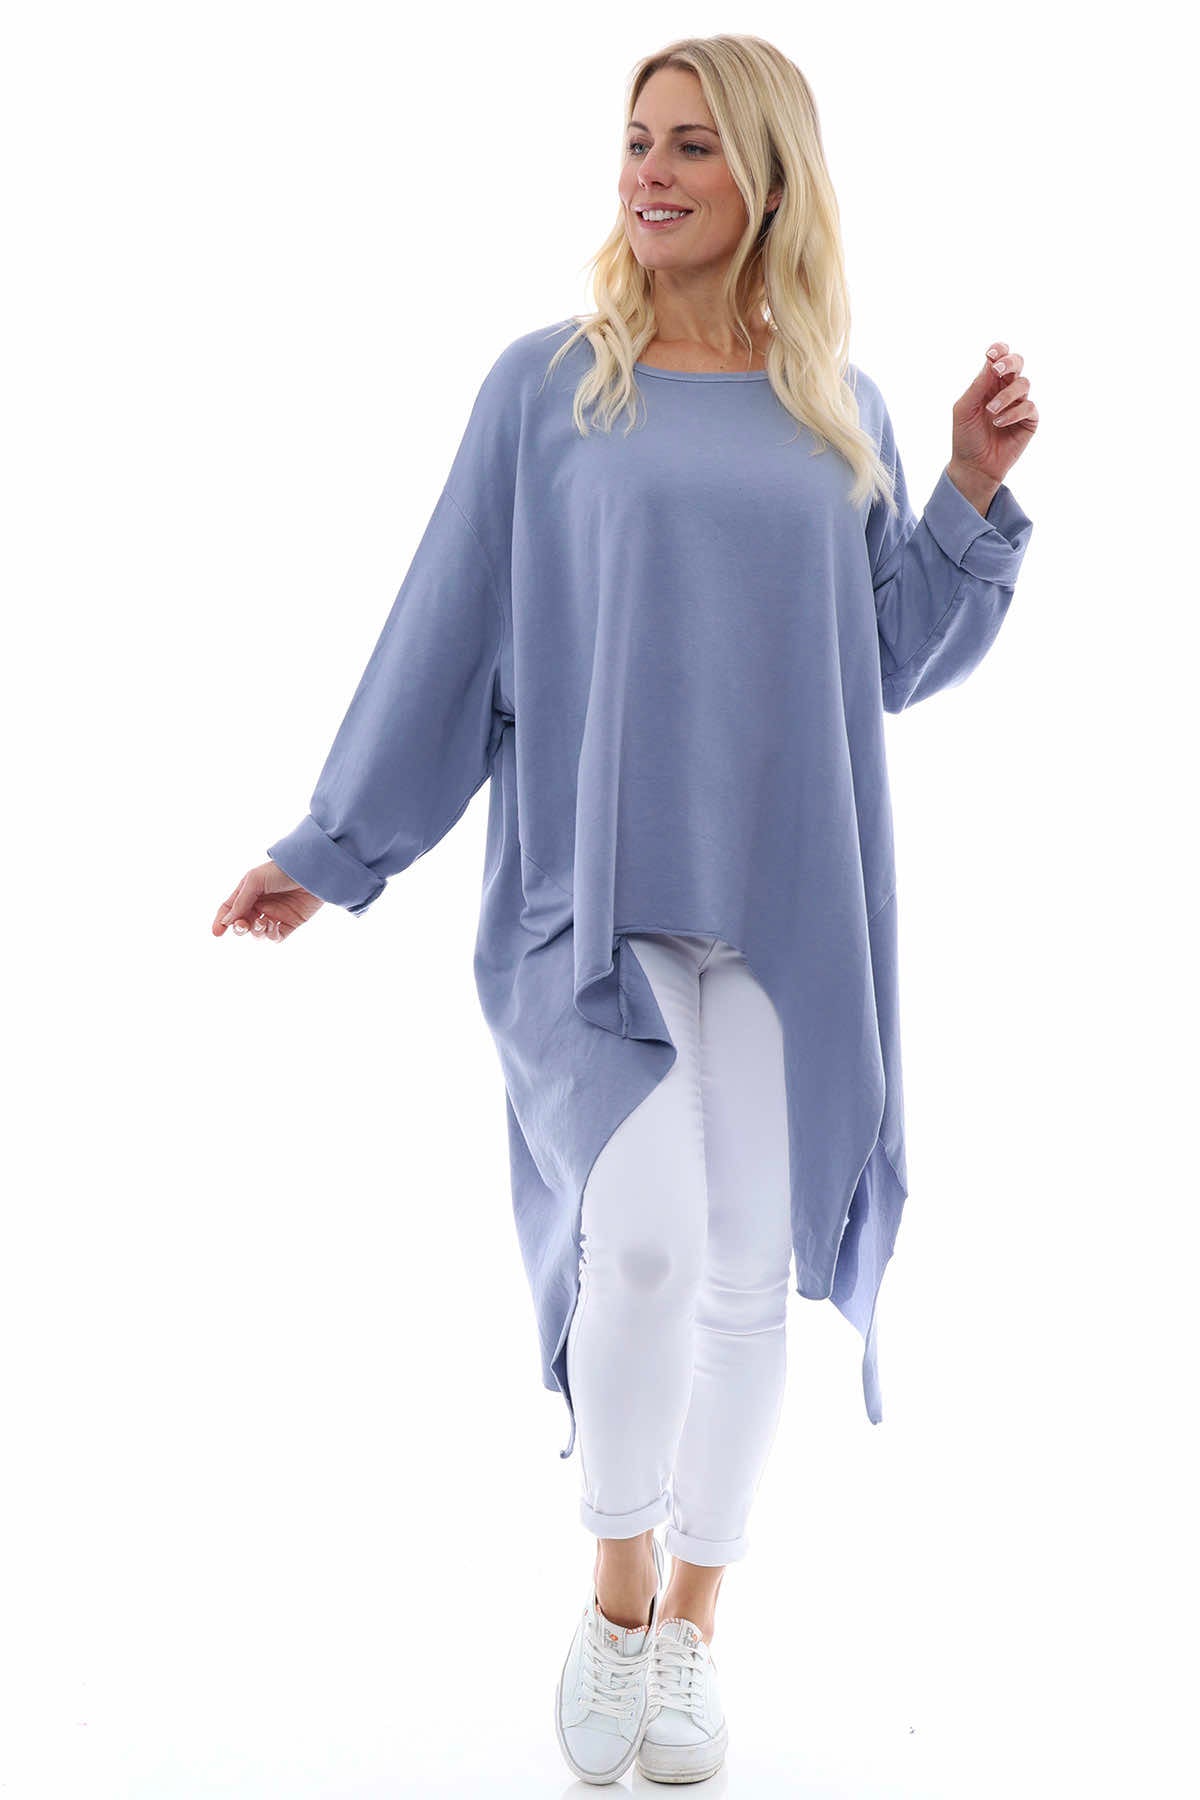 Caira Dipped Side Cotton Top Blue Grey